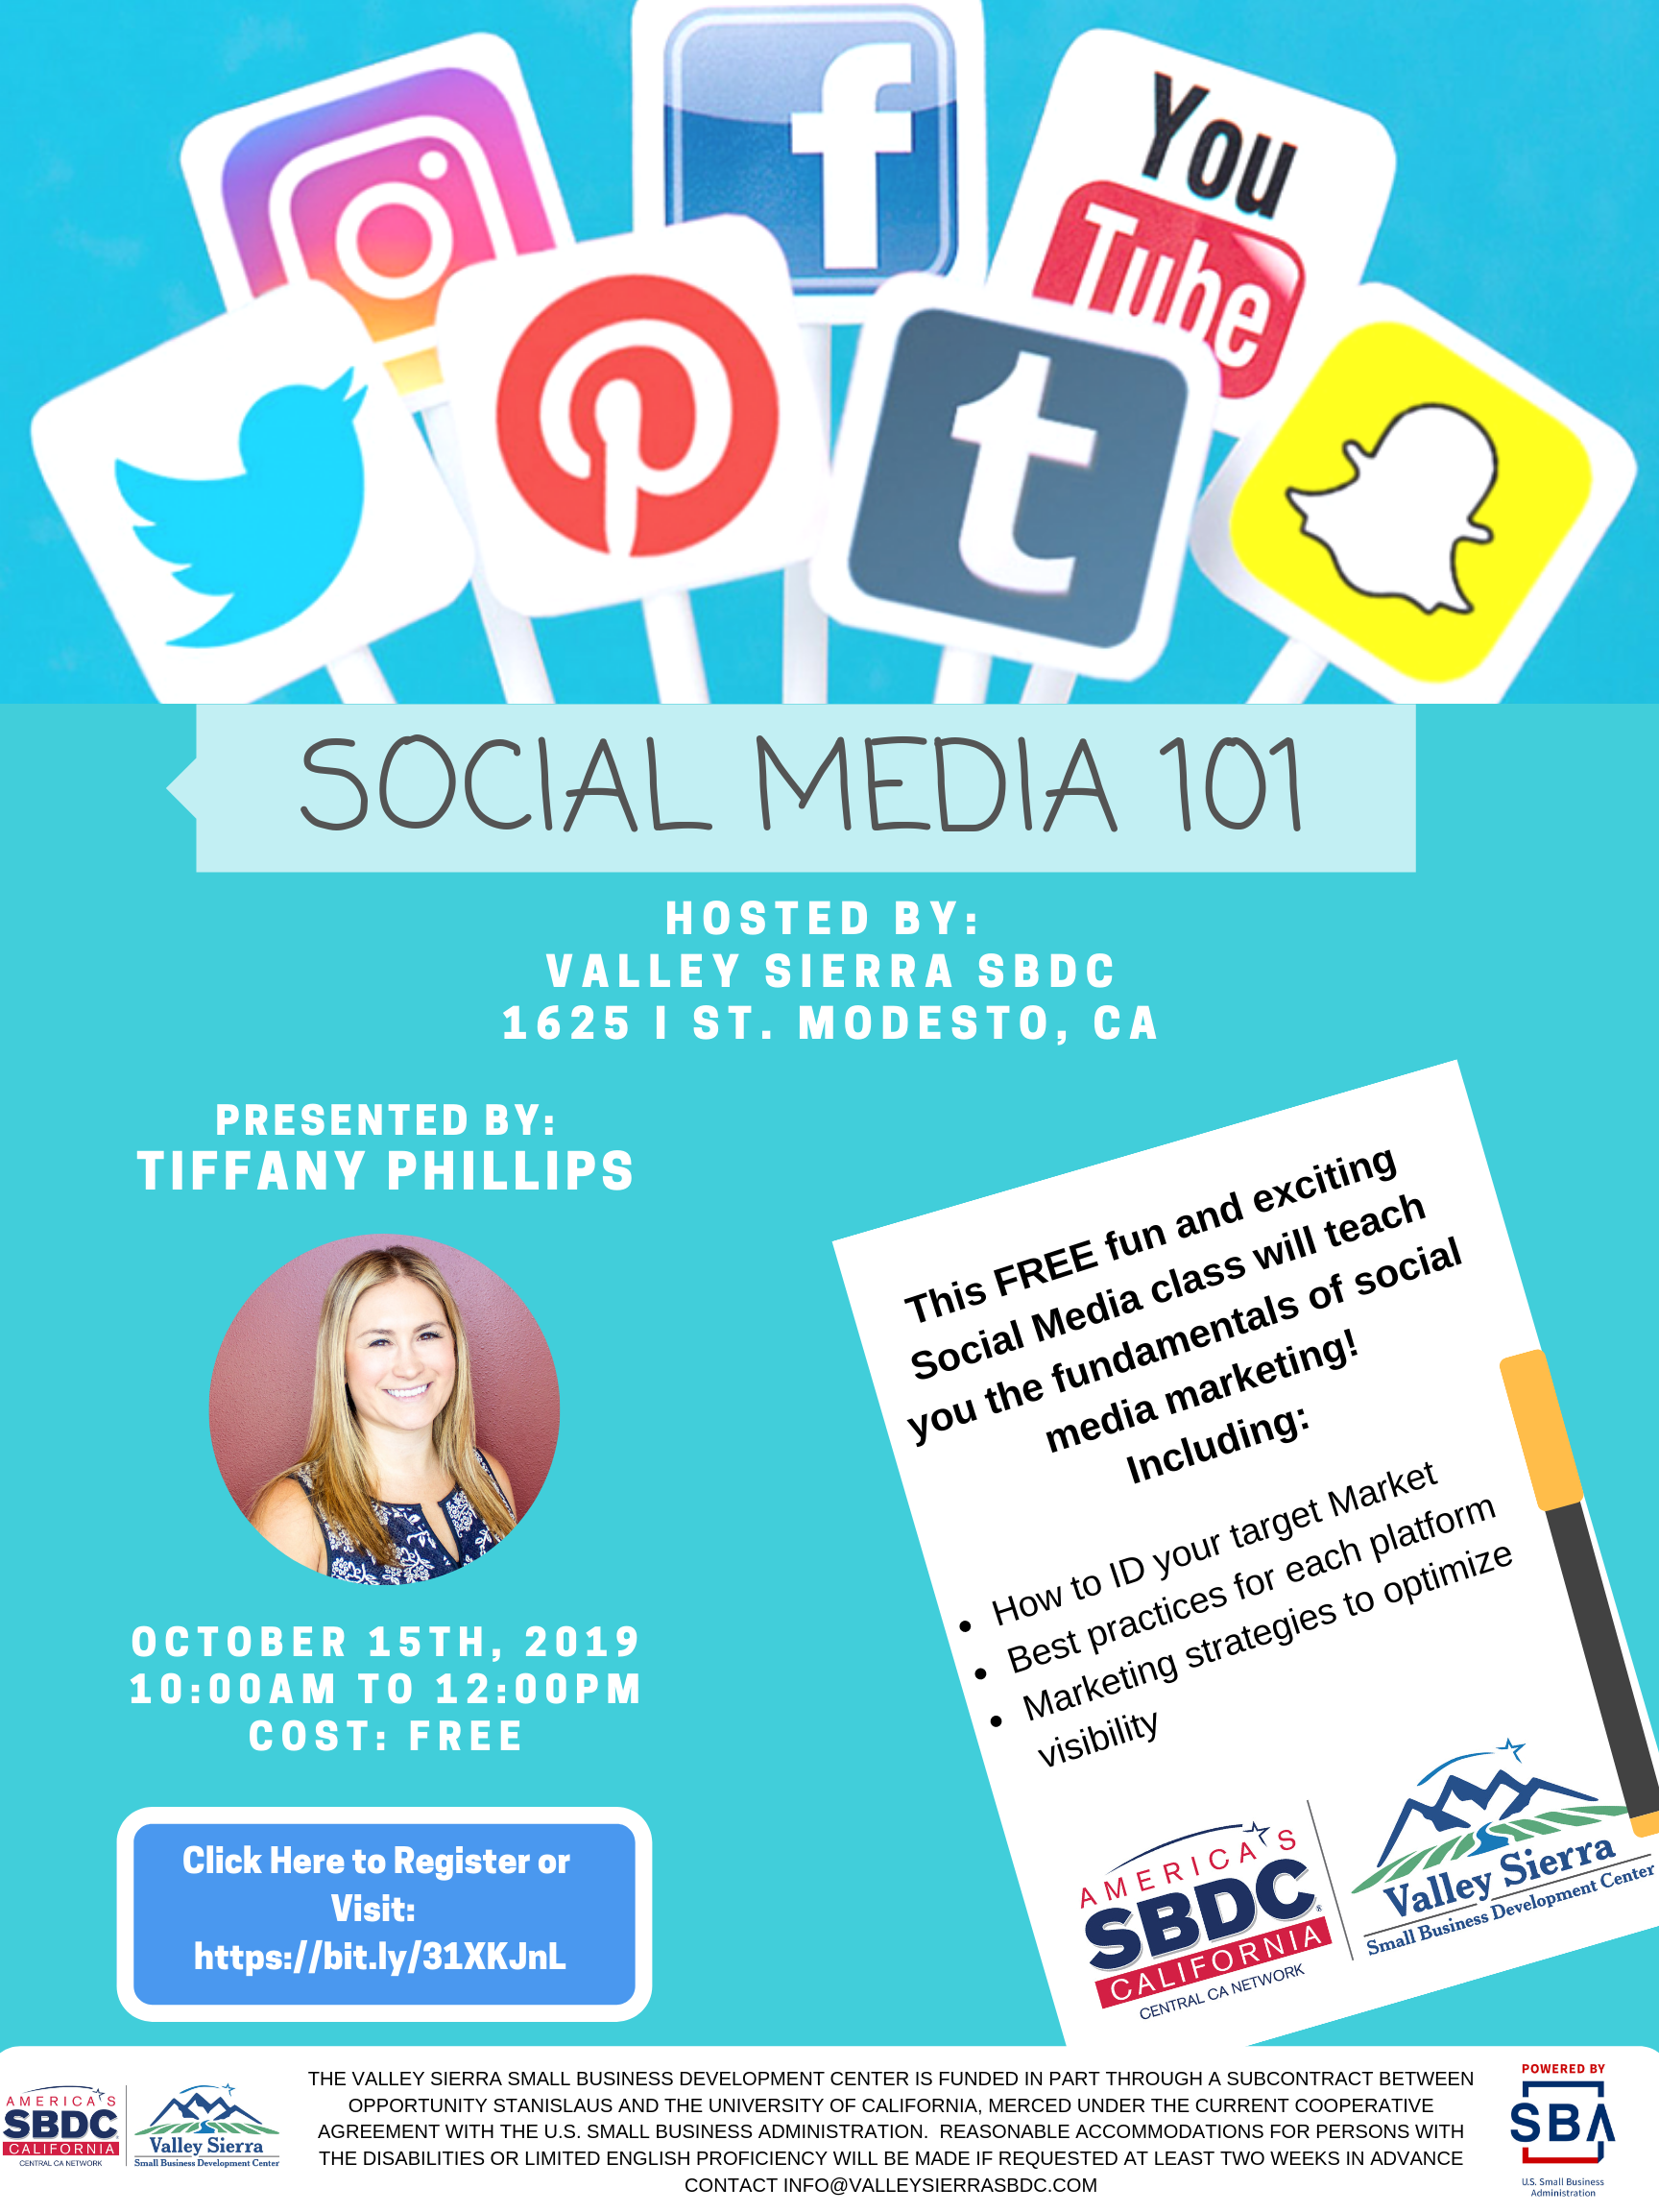 Event Flyer, Hosted by Valley Sierra SBDC, 1625 I St. Modesto, CA, October 15th, 2019, 10am to 12pm, Cost is Free.  This FREE fun and exciting Social Media class will teach you the fundamentals of social media marketing! Including: How to ID your target Market Best practices for each platform Marketing strategies to optimize visibility.